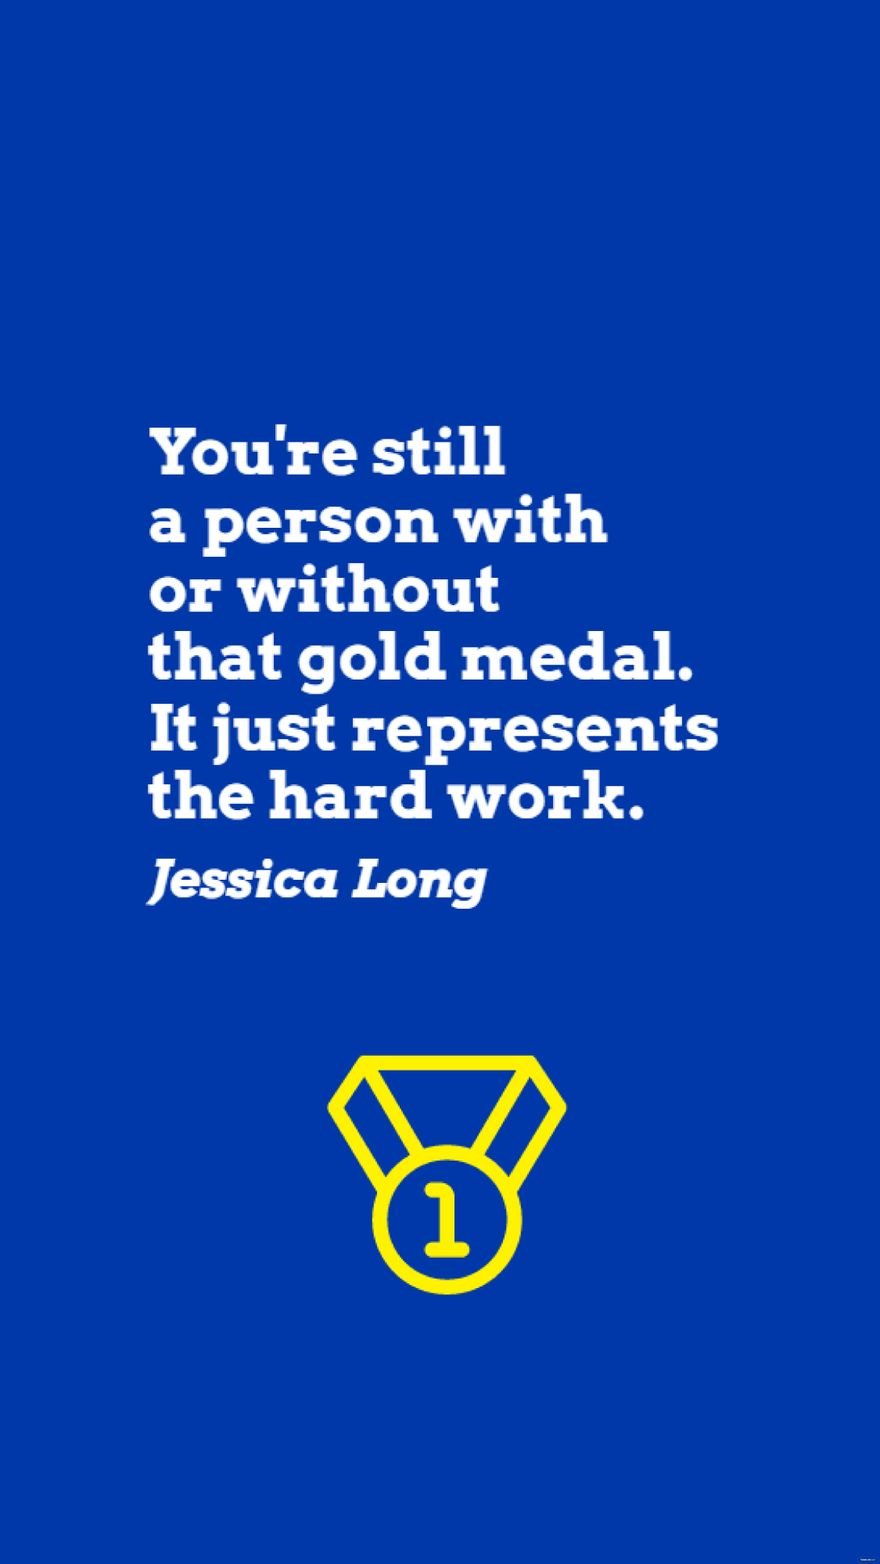 Jessica Long - You're still a person with or without that gold medal. It just represents the hard work. in JPG